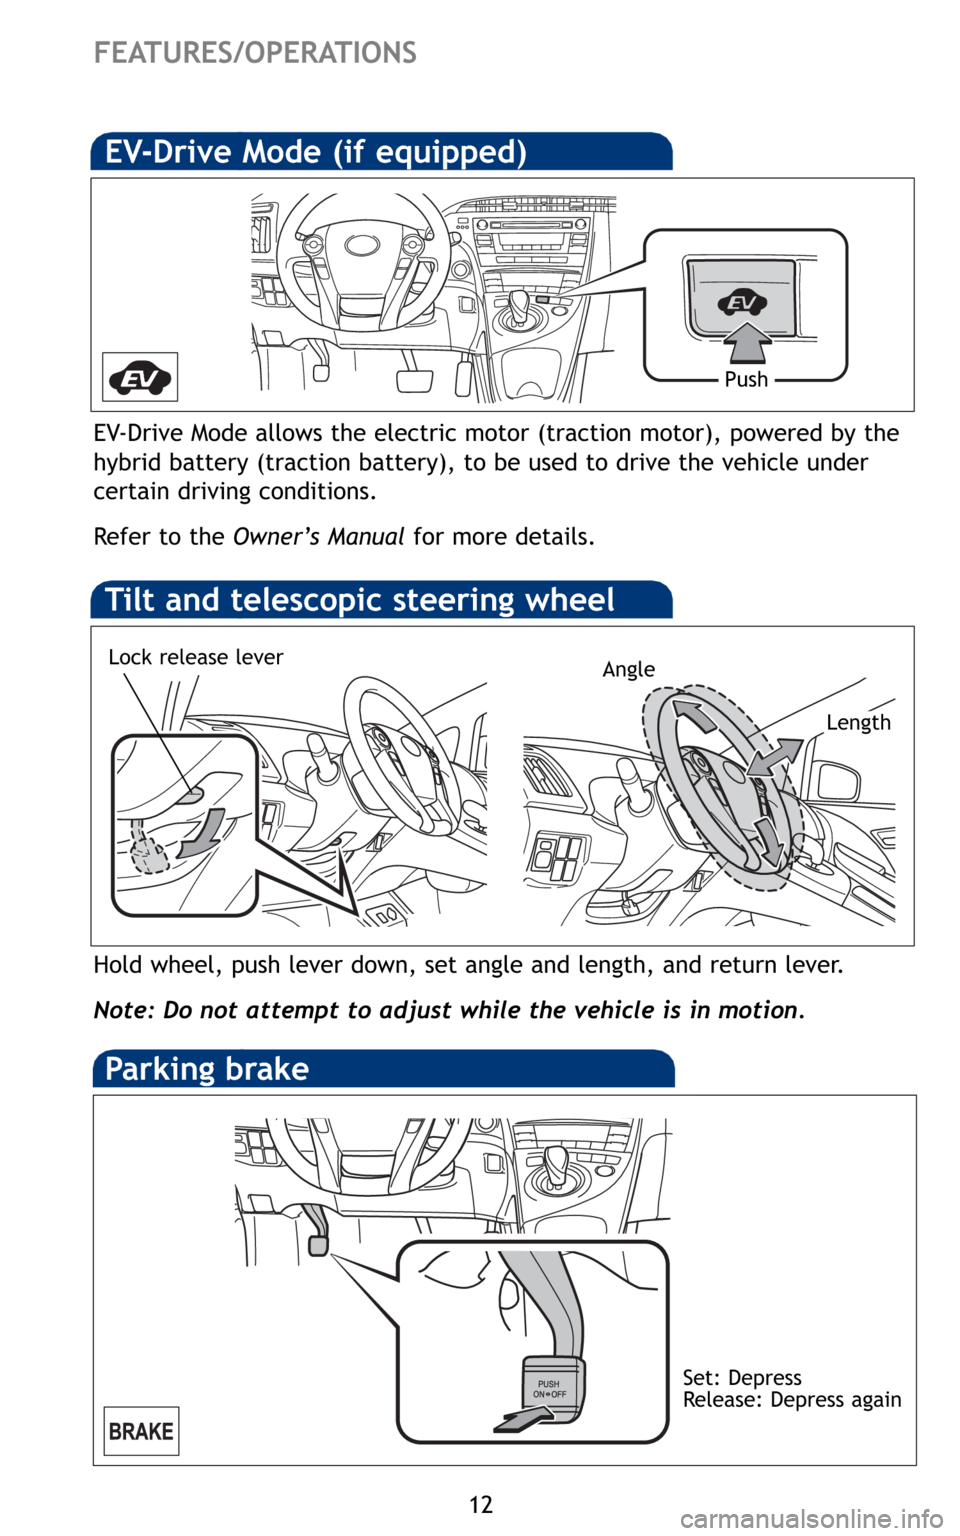 TOYOTA PRIUS 2010 3.G Quick Reference Guide 12
FEATURES/OPERATIONS
Hold wheel, push lever down, set angle and length, and return lever.
Note: Do not attempt to adjust while the vehicle is in motion.
Tilt and telescopic steering wheel
EV-Drive M